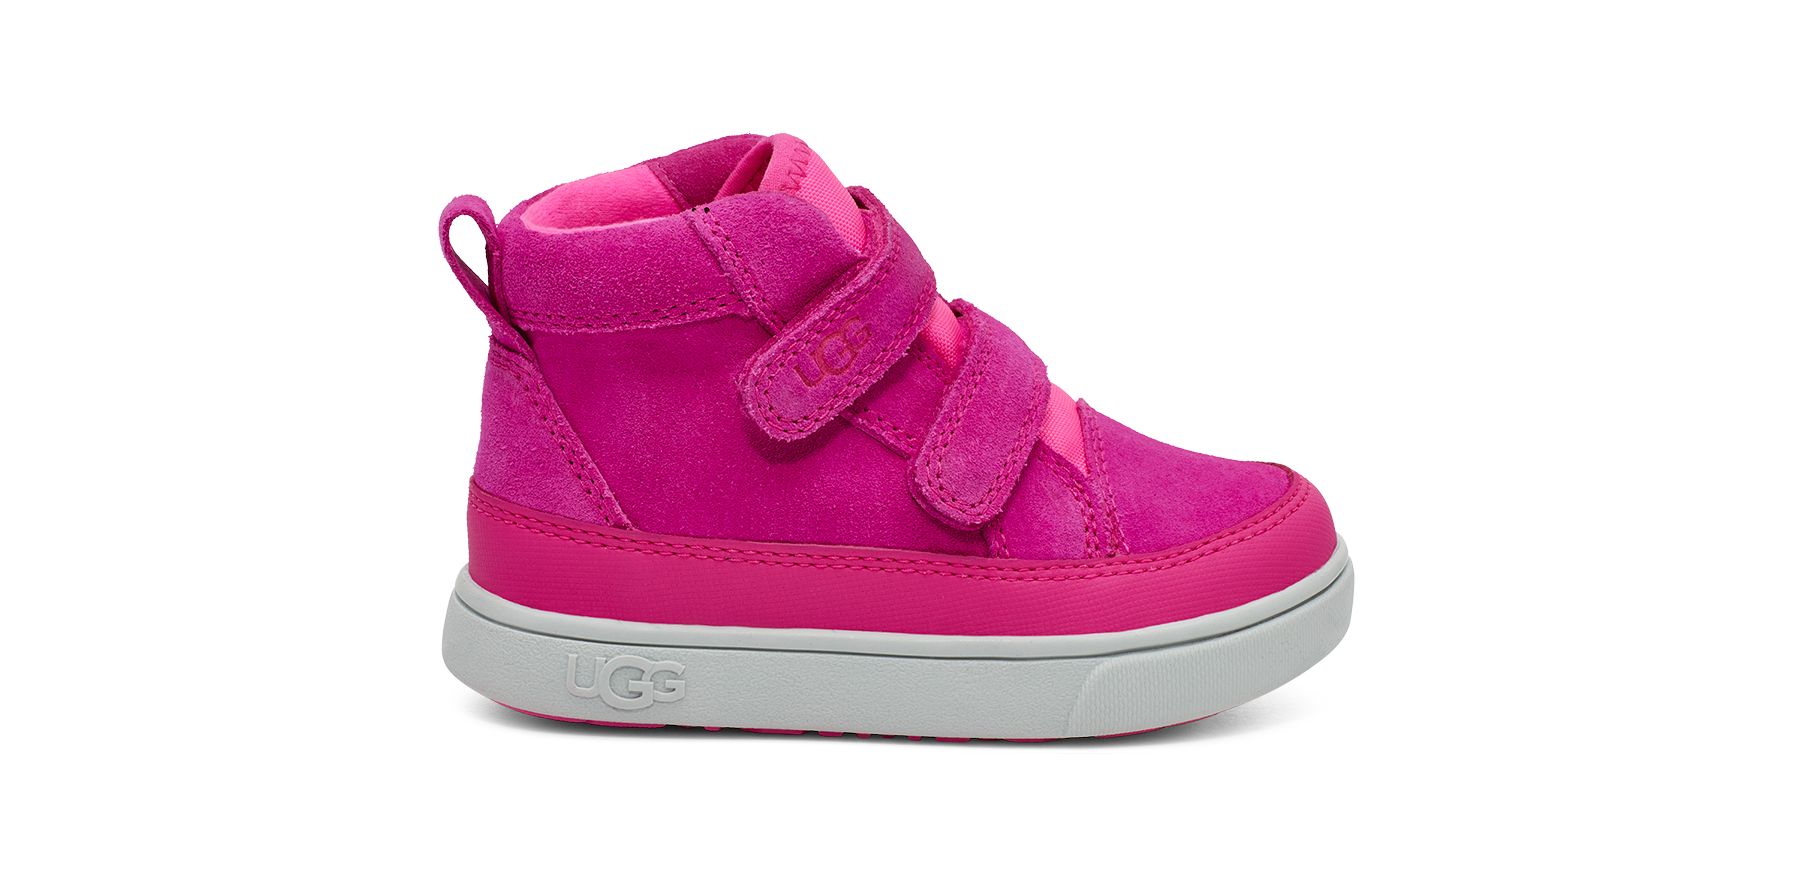 UGG Toddlers' Rennon II Weather Suede Sneakers in Rock Rose, Size 8T | UGG (US)